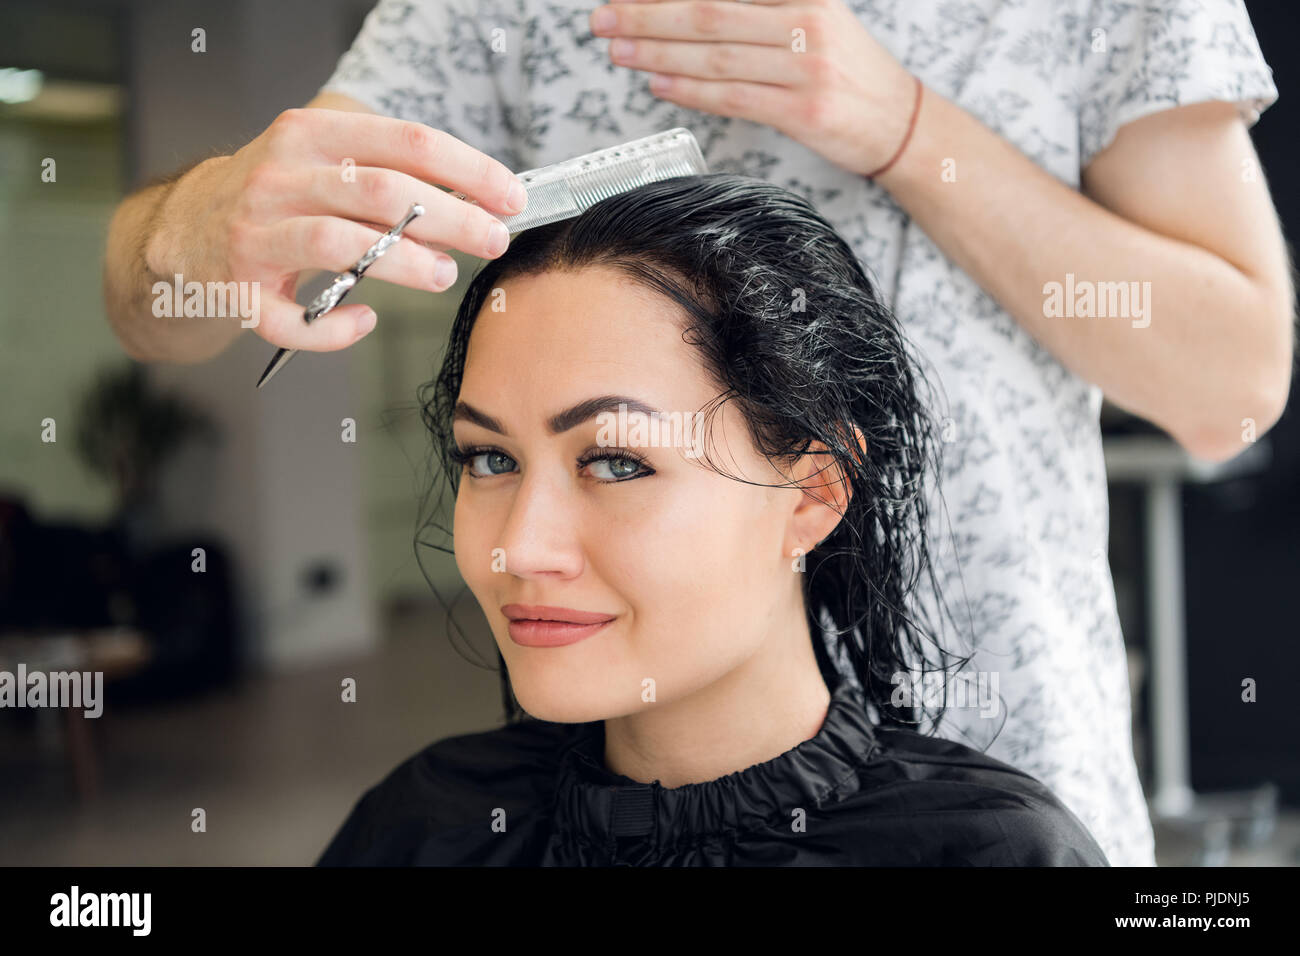 Hairdresser cutting woman's hair in salon, smiling, front view, close-up, portrait Stock Photo